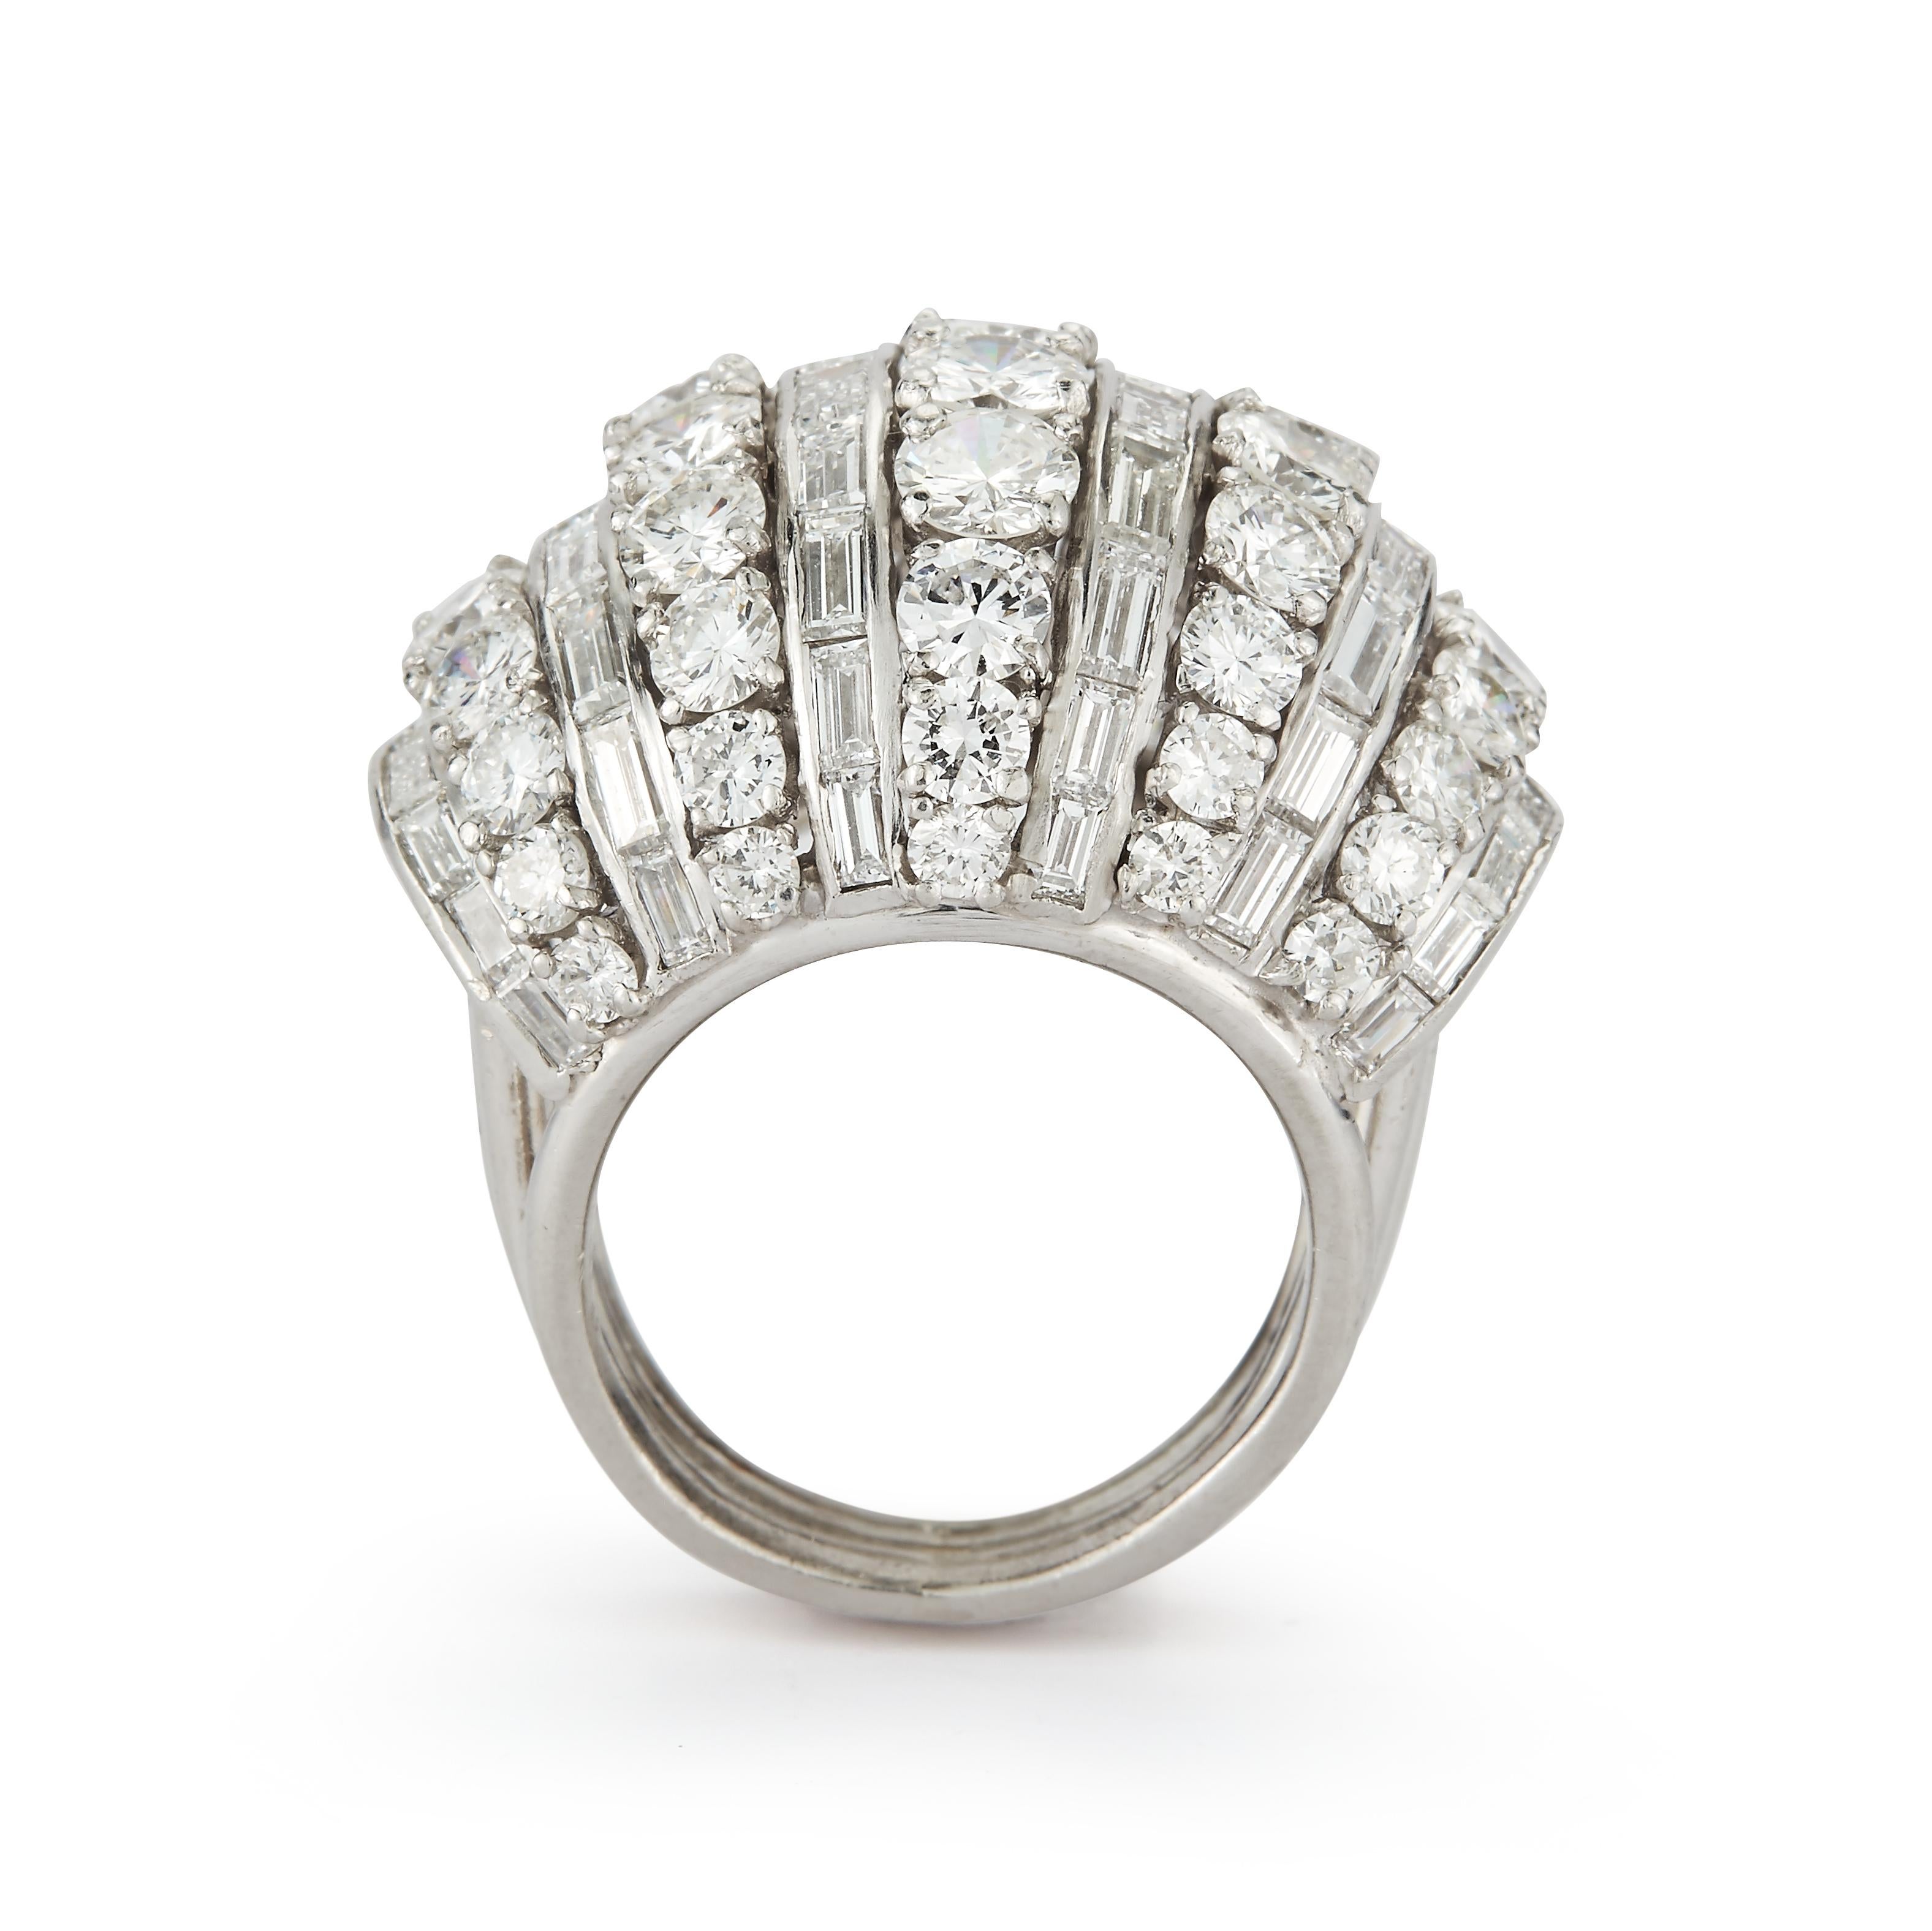 Diamond Cocktail Ring, 11 rows of round & baguette cut diamonds set in 18k white gold 

Approximately 11 carats of diamonds

Ring Size: 4

Sizable to any size